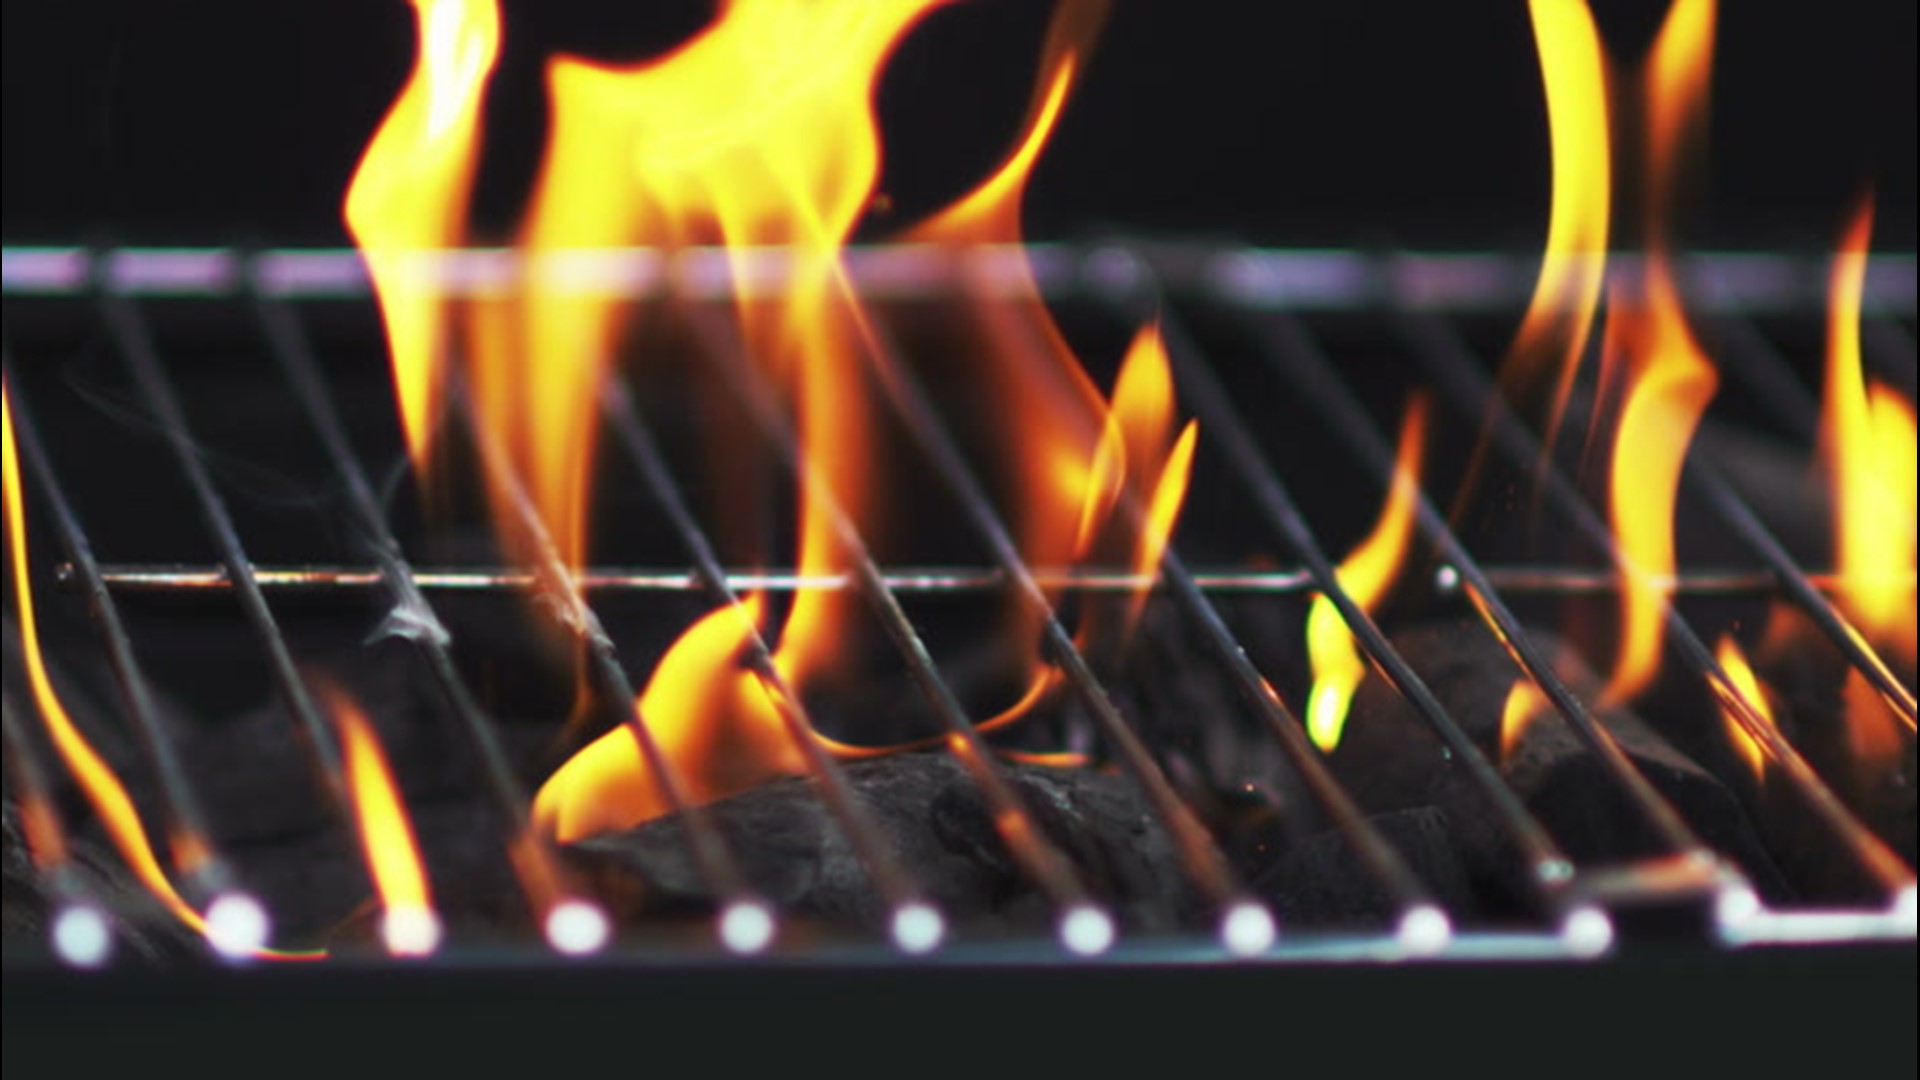 Grilling is a spring and summertime favorite, but they can also cause fires if people are not careful. Here's how you can grill safely and prevent a fire.